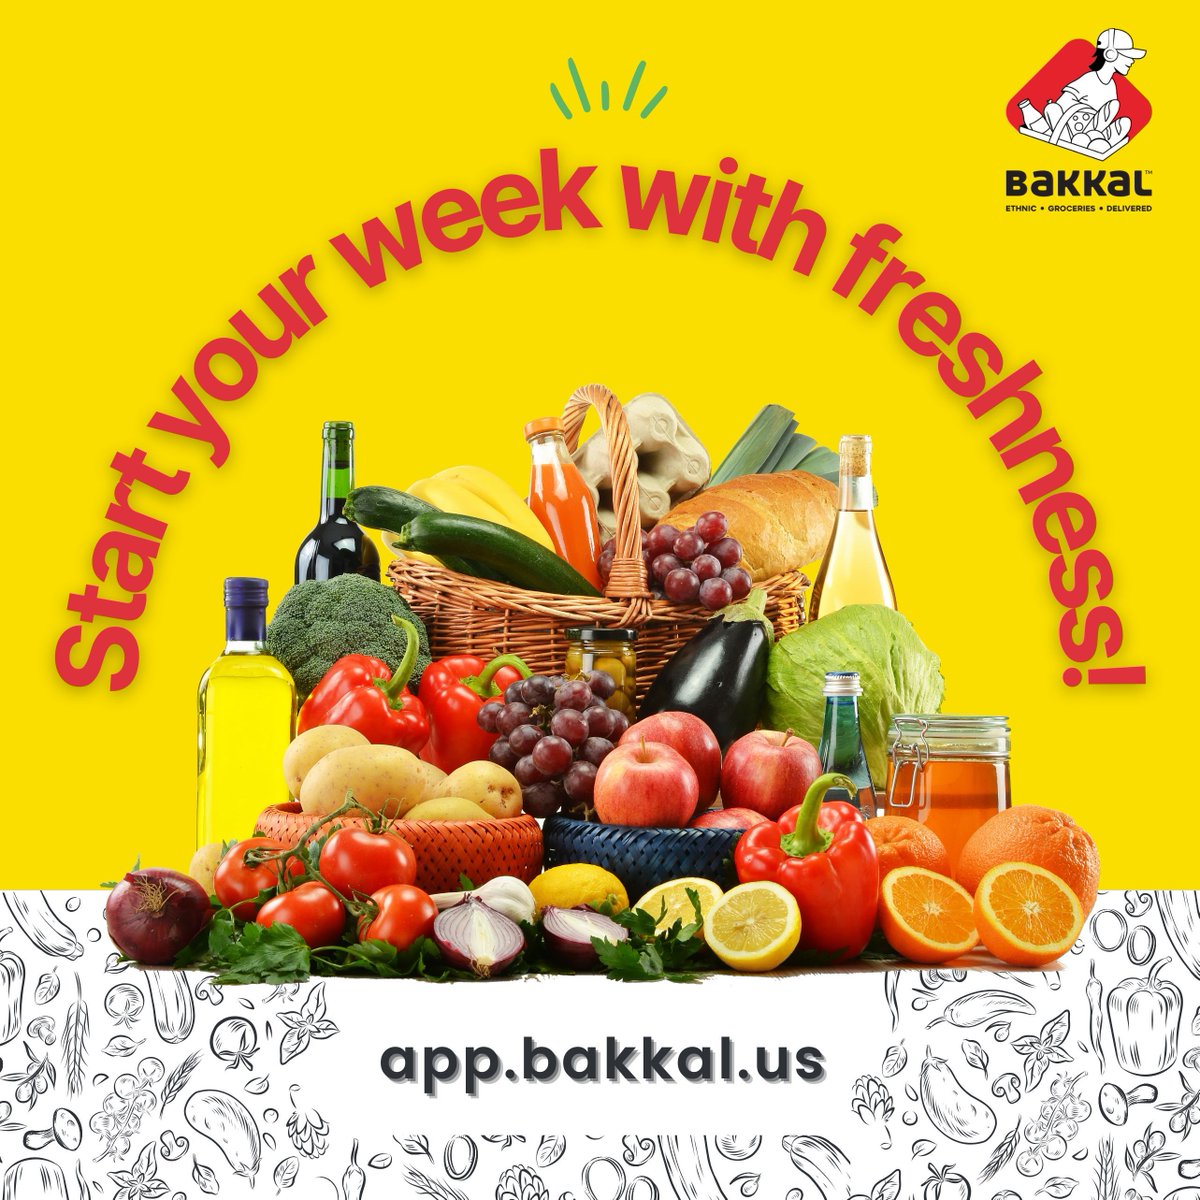 Start your week with freshness! 🍅🥒 Explore Bakkal for the finest selection of fruits and veggies. Order now and elevate your meals! #FreshStart #BakkalDelights #HealthyEating #FreshProduce #MealPrep #GroceryShopping #OnlineGrocery #Convenience #FoodieFinds #NutritiousChoices